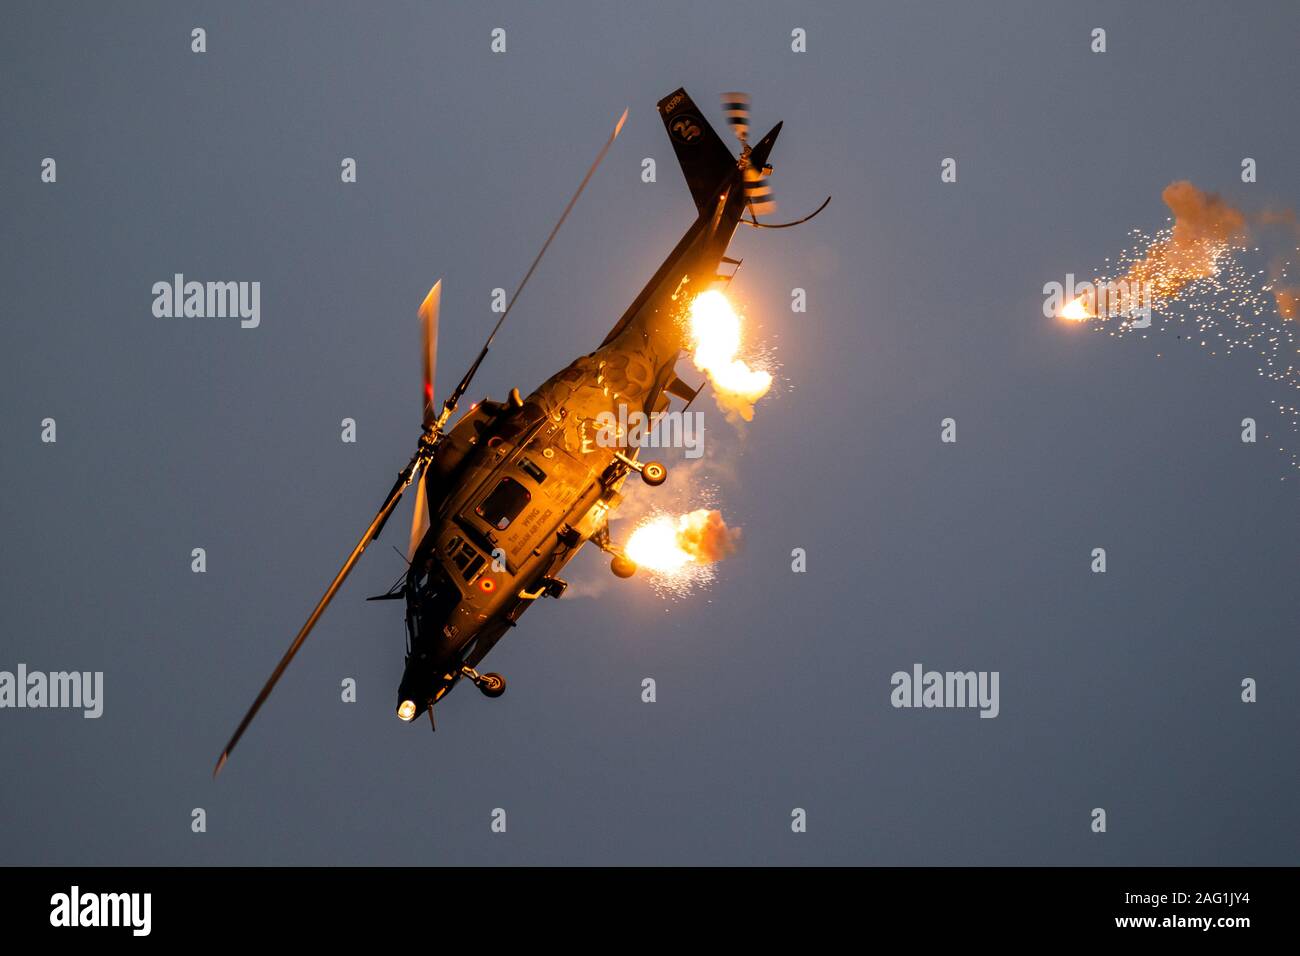 SANICOLE, BELGIUM - SEP 13, 2019: Belgian Air Force Agusta A109 helicopter firing flares during a flight demonstration at the Sanice Sunset Airshow Stock Photo